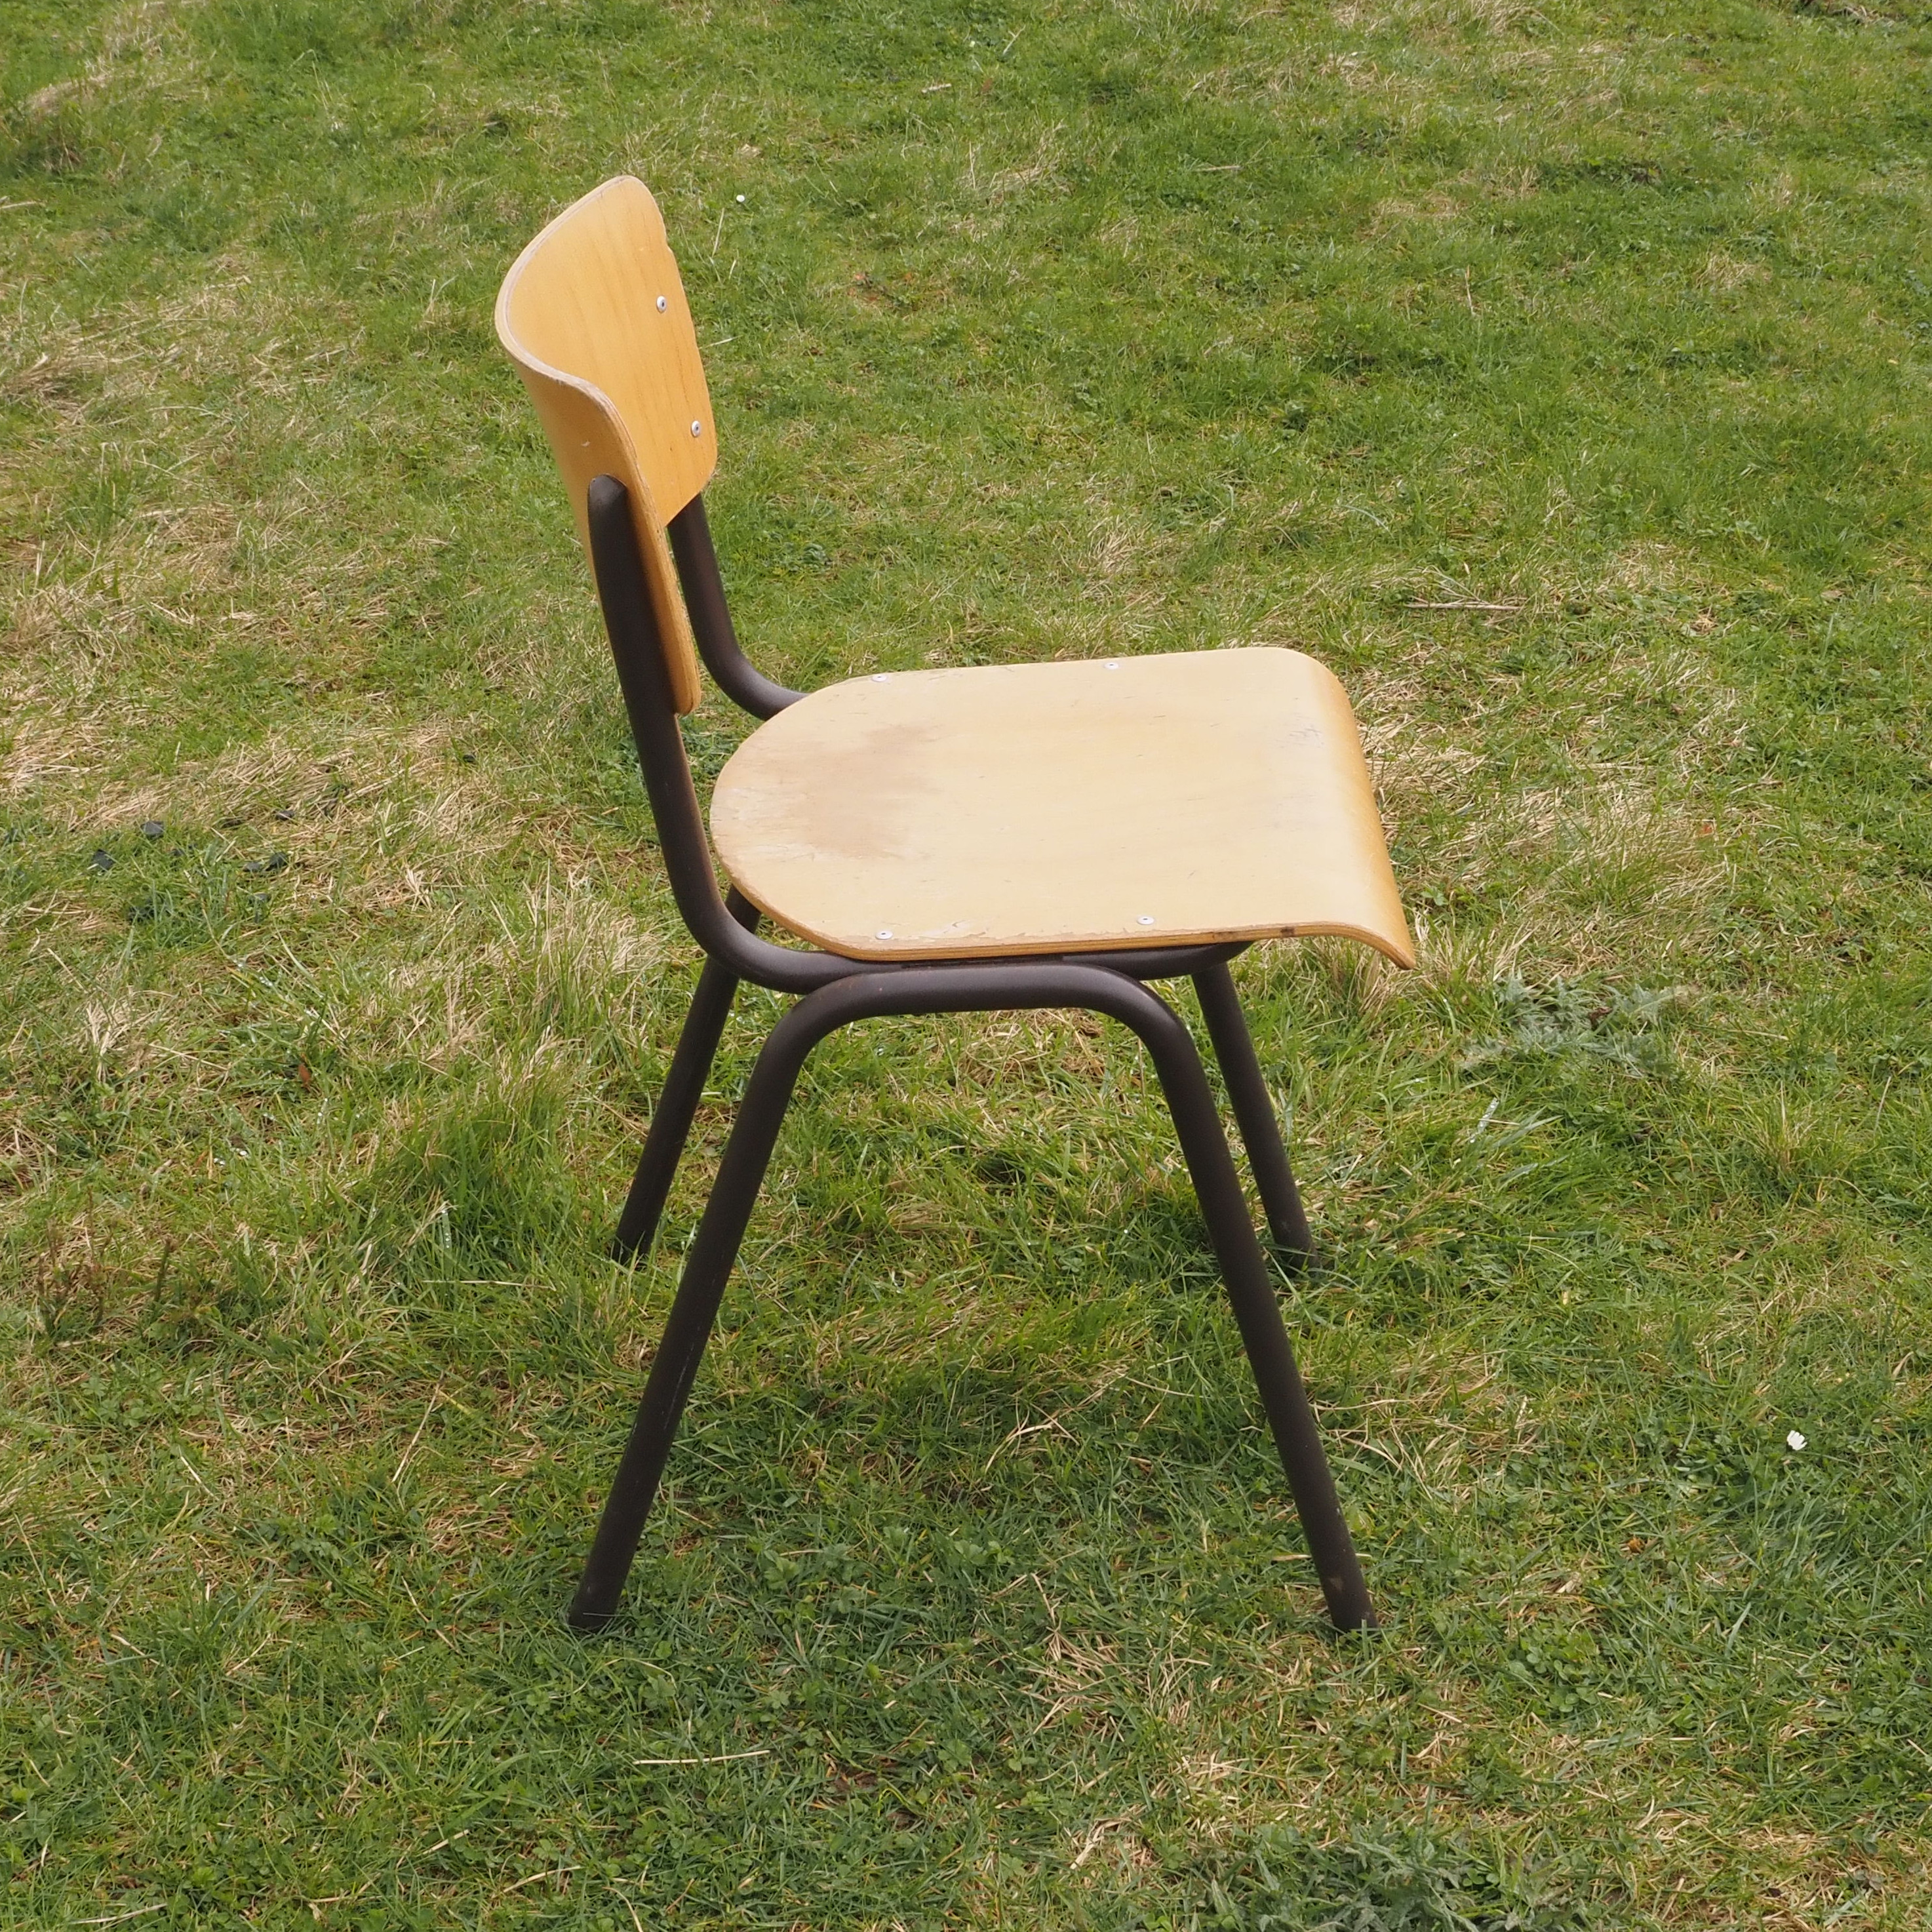 Stackable school chair in plywood and steel tube legs